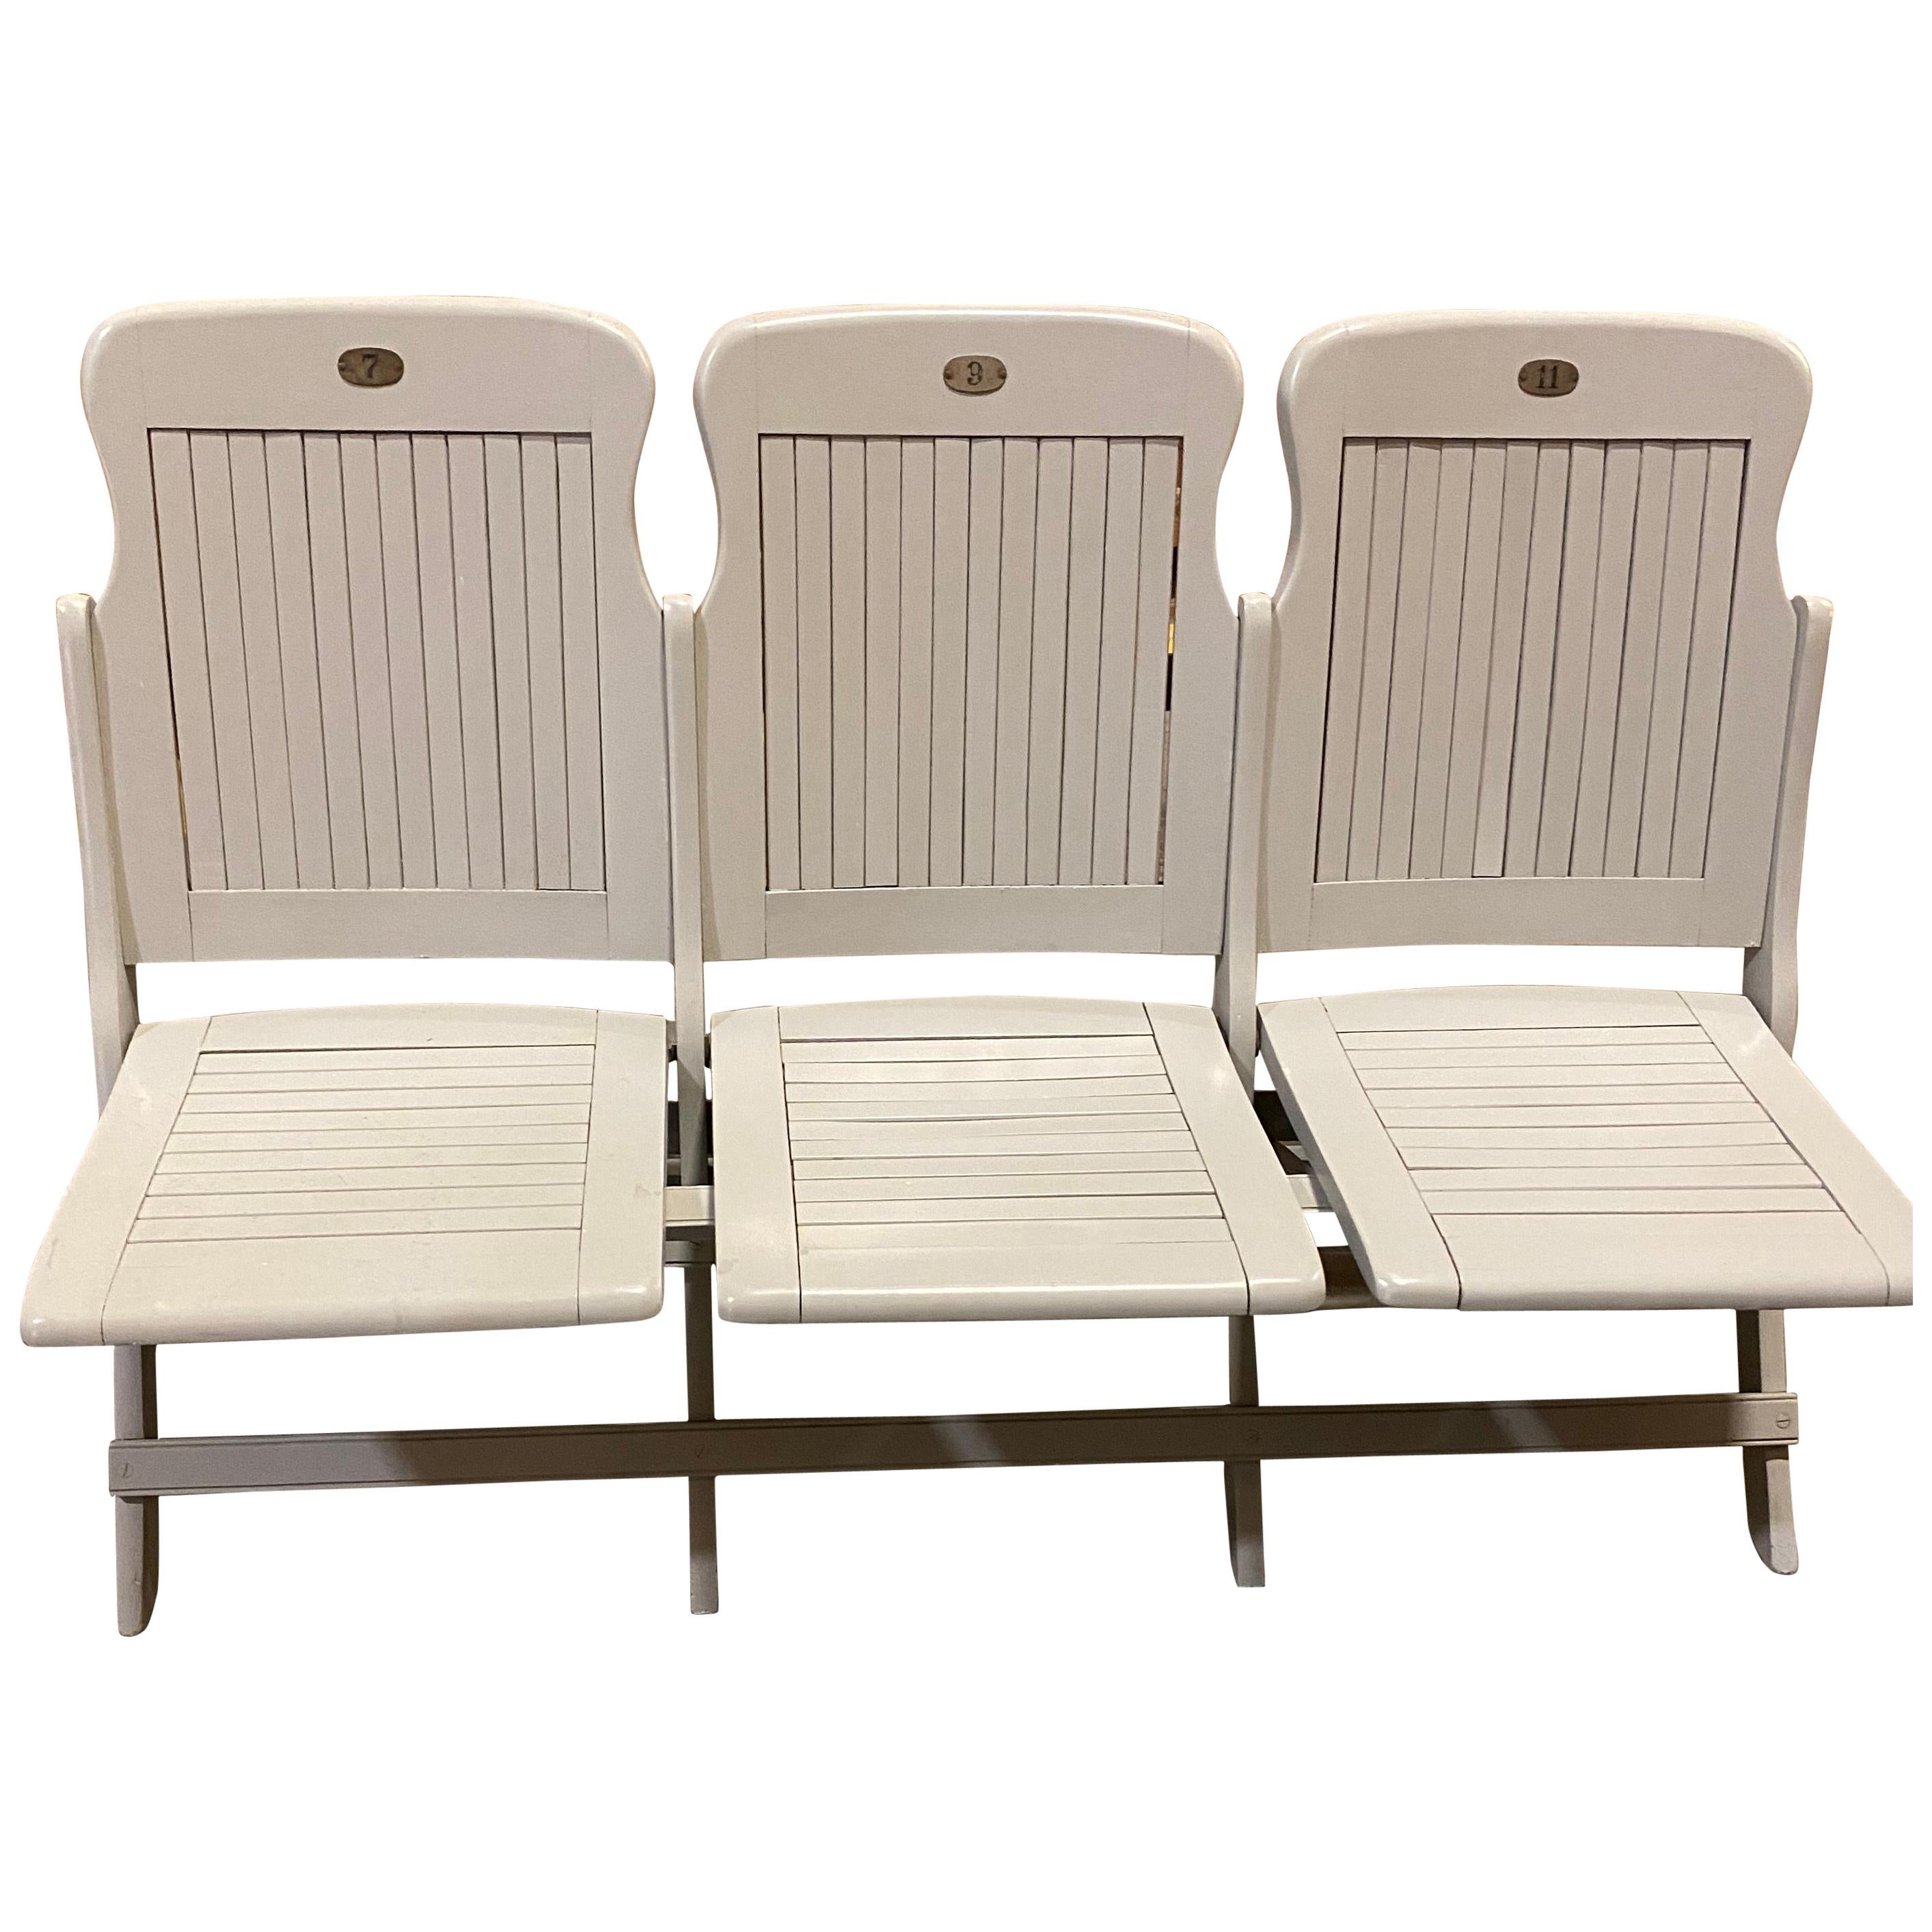 Heywood-Wakefield Three-Seat Folding Bench, United States, Midcentury For Sale